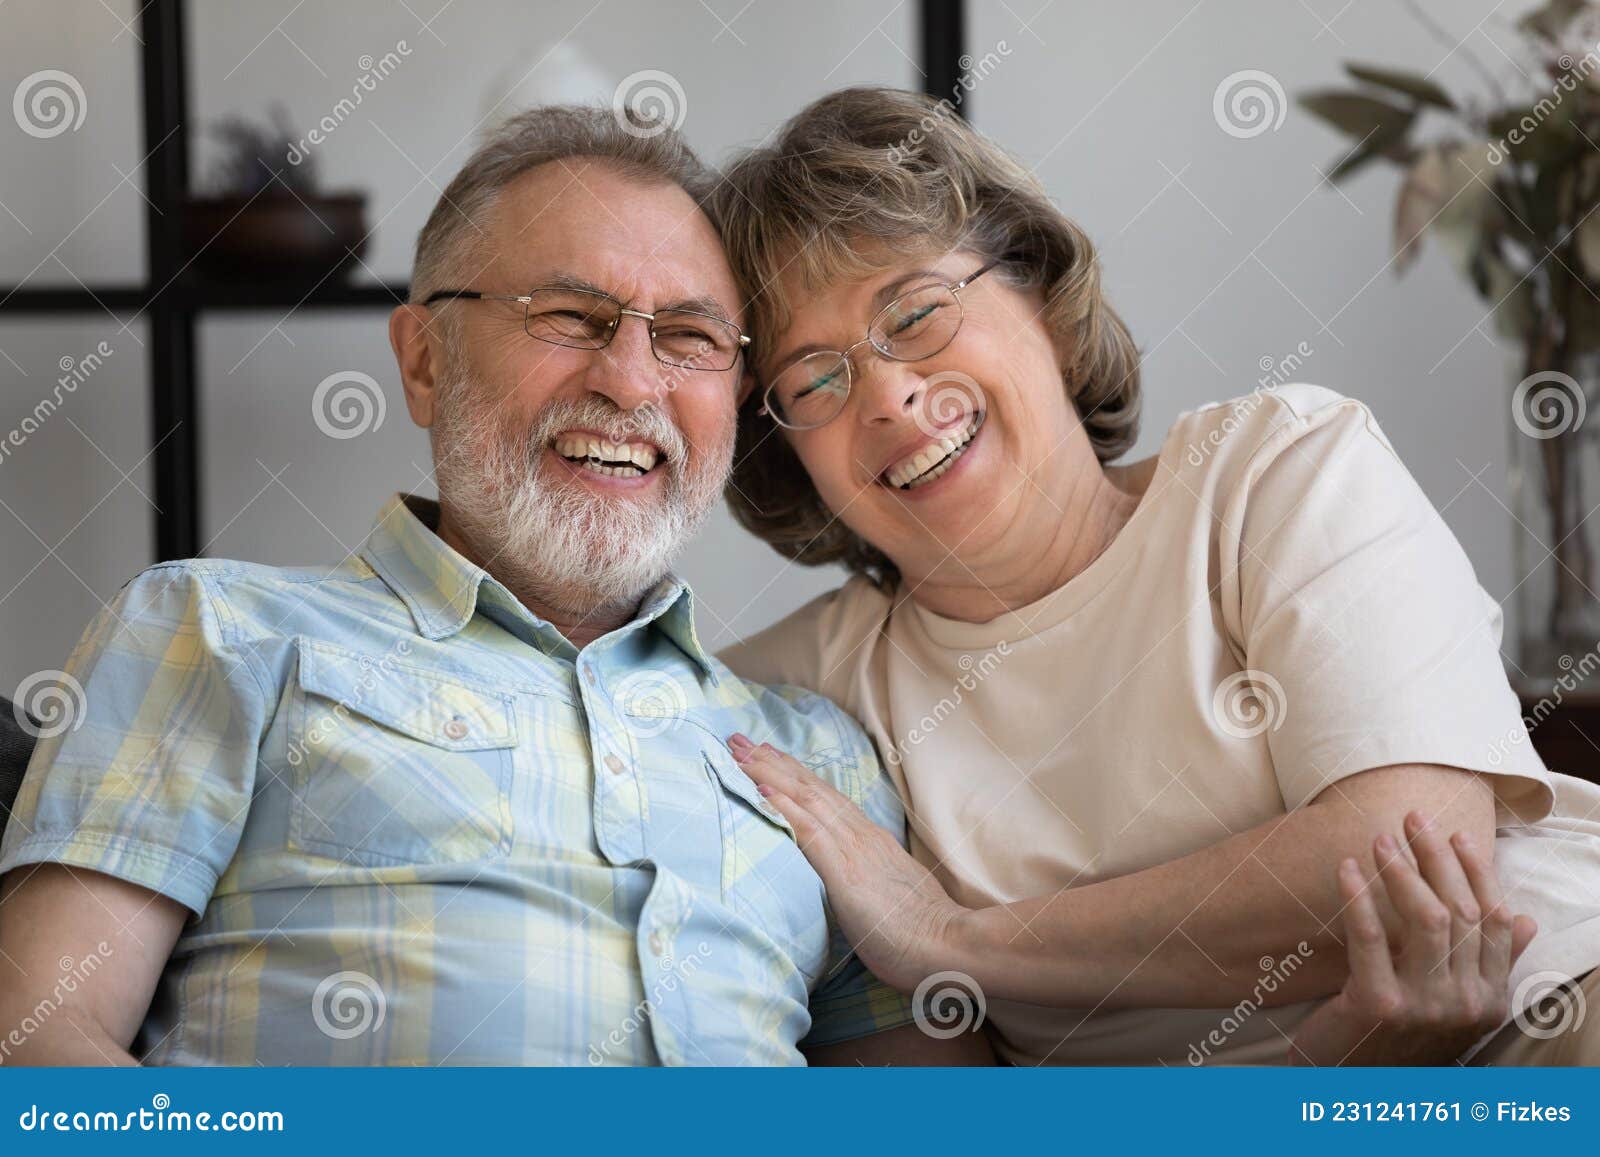 Happy Old Mature Bonding Married Couple Laughing at Funny Joke. Stock Image  - Image of affectionate, conversation: 231241761